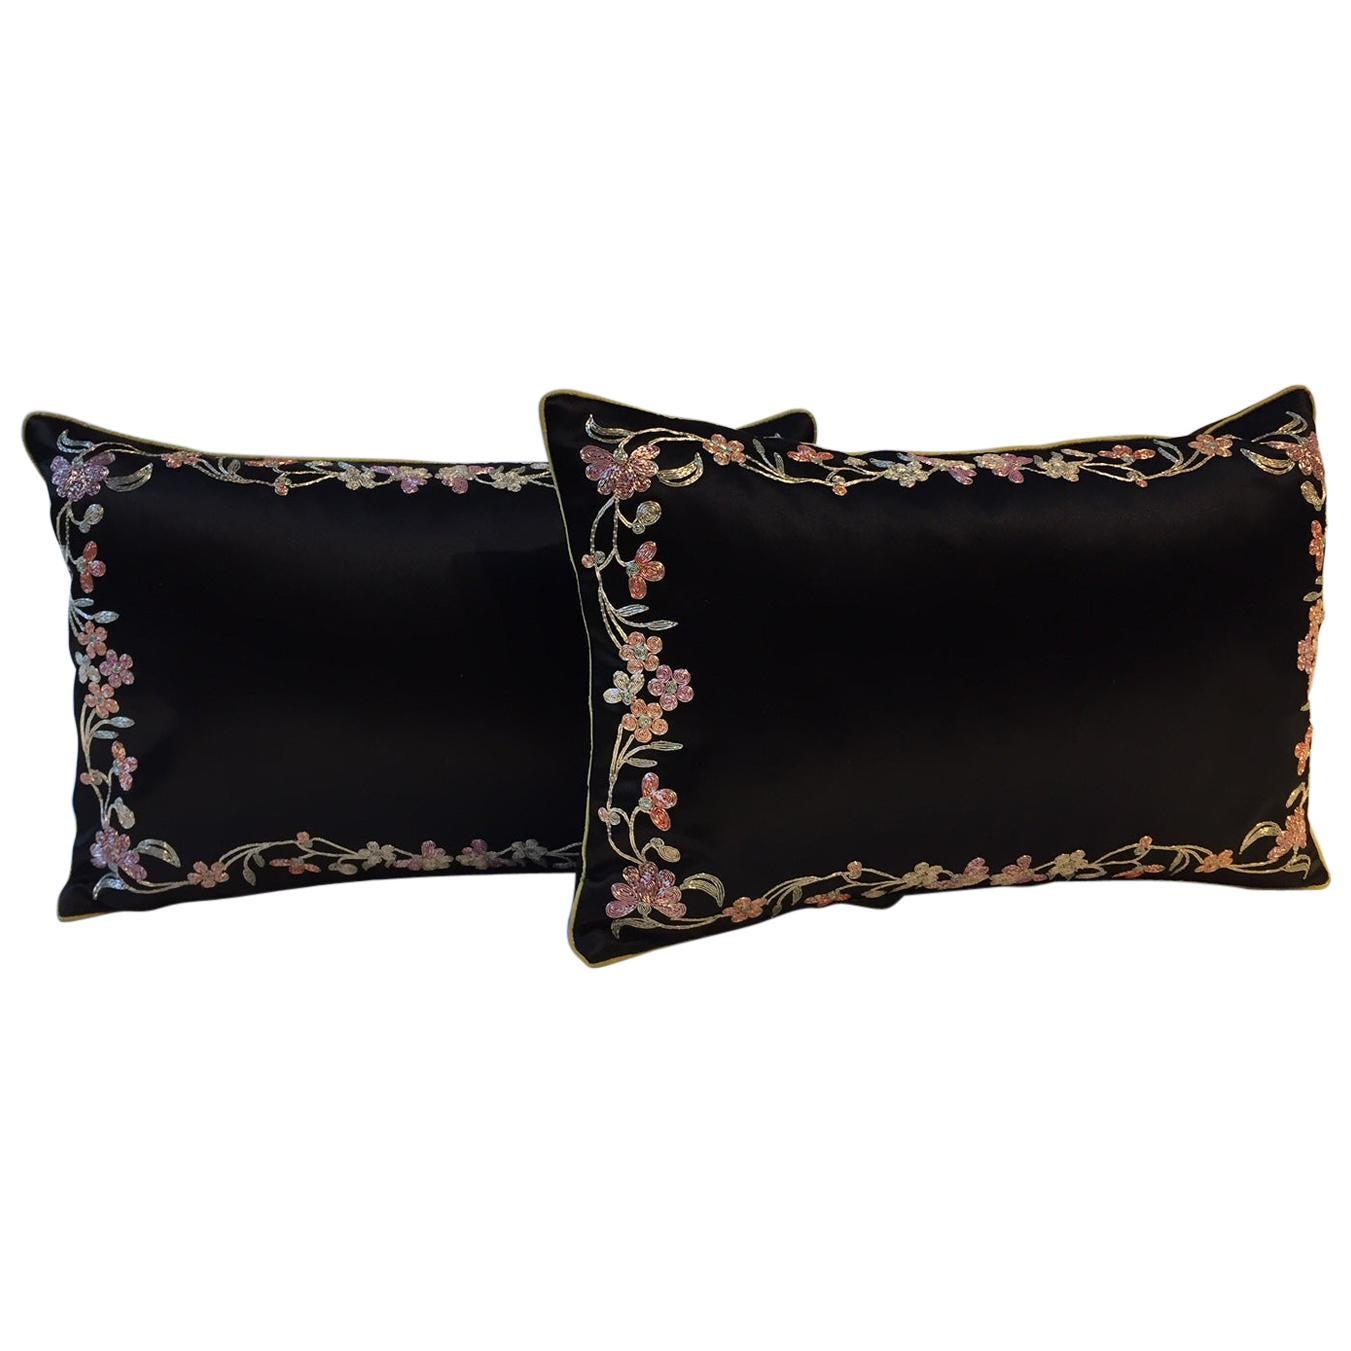 Pair of Cushion Silk Satin Black with Chinese Floral Hand Embroidery For Sale